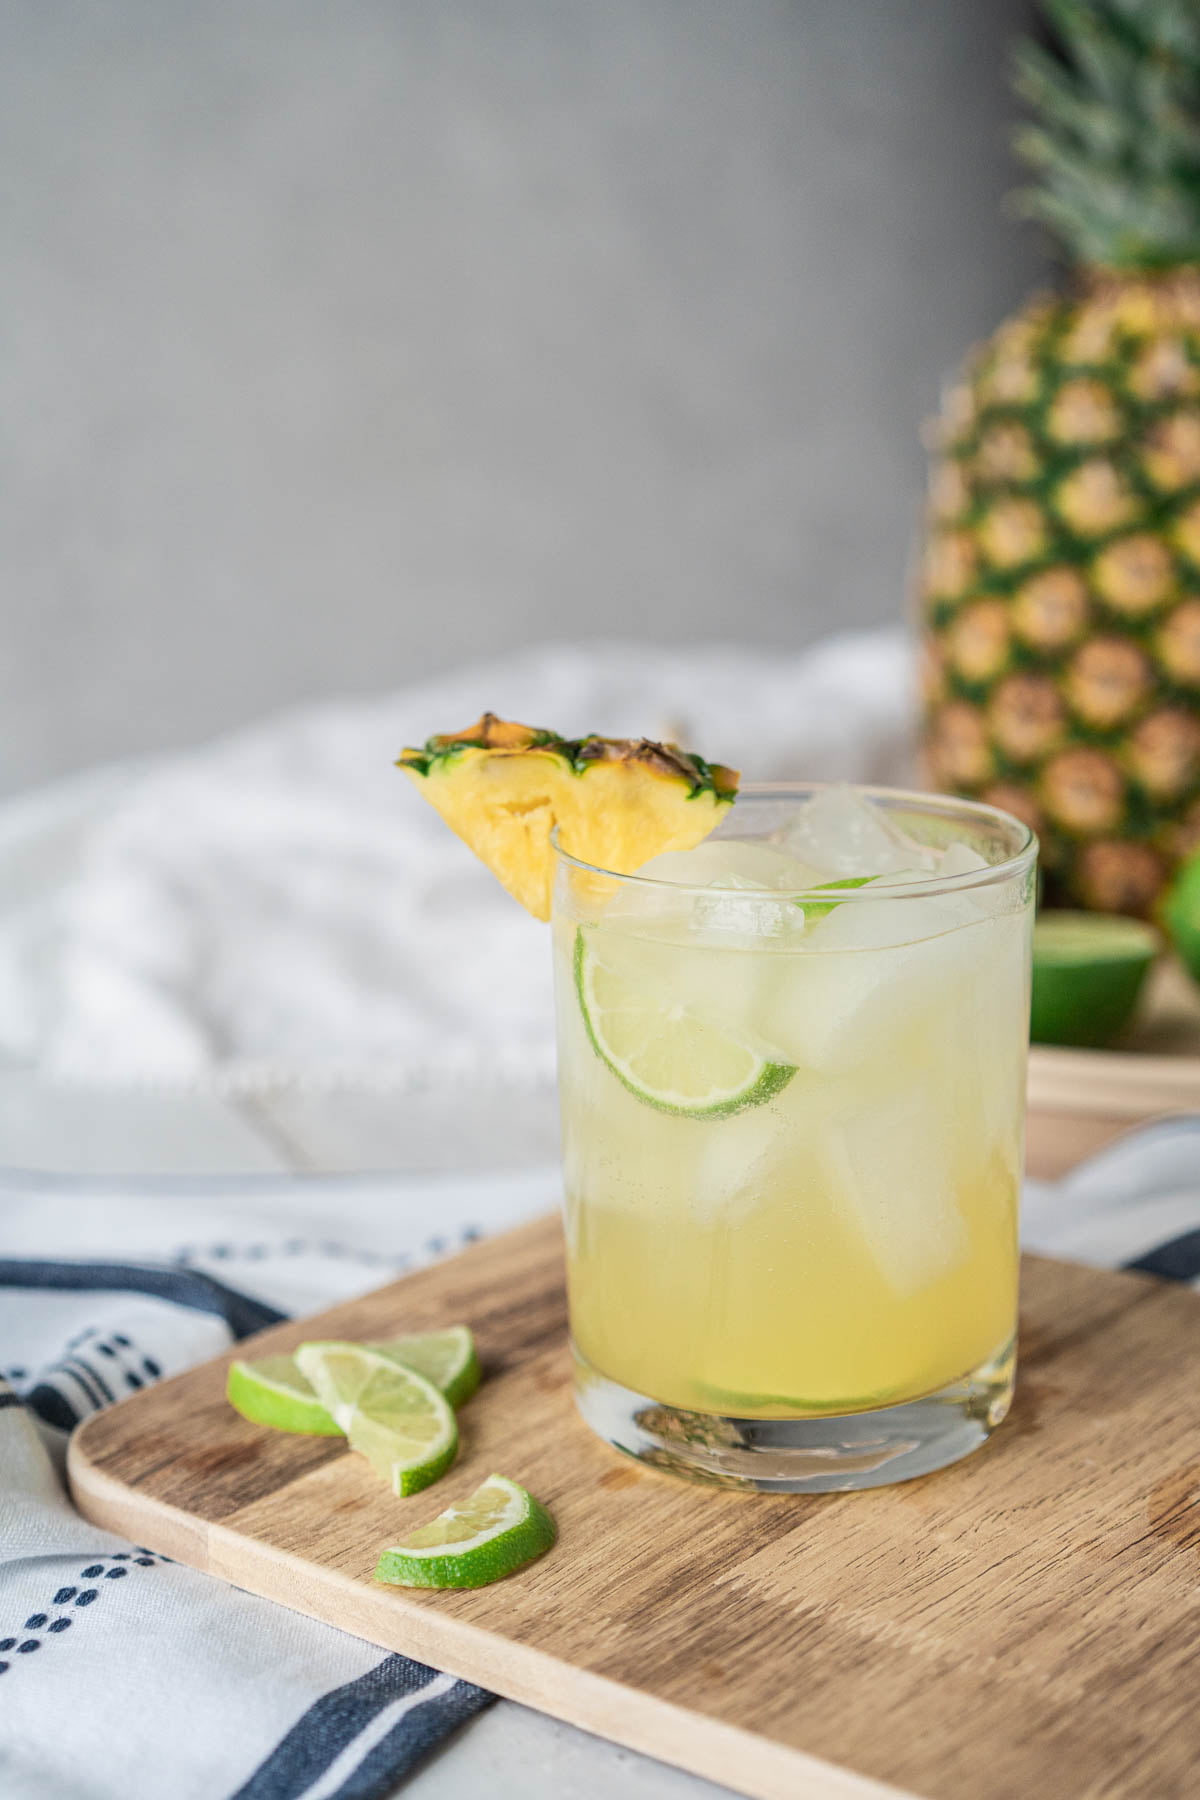 In the foreground, a rocks glass filled with ice and a light yellow drink, garnished with lime and pineapple wedges sits on a cutting board. Blurred in the background is a large pineapple and sliced limes